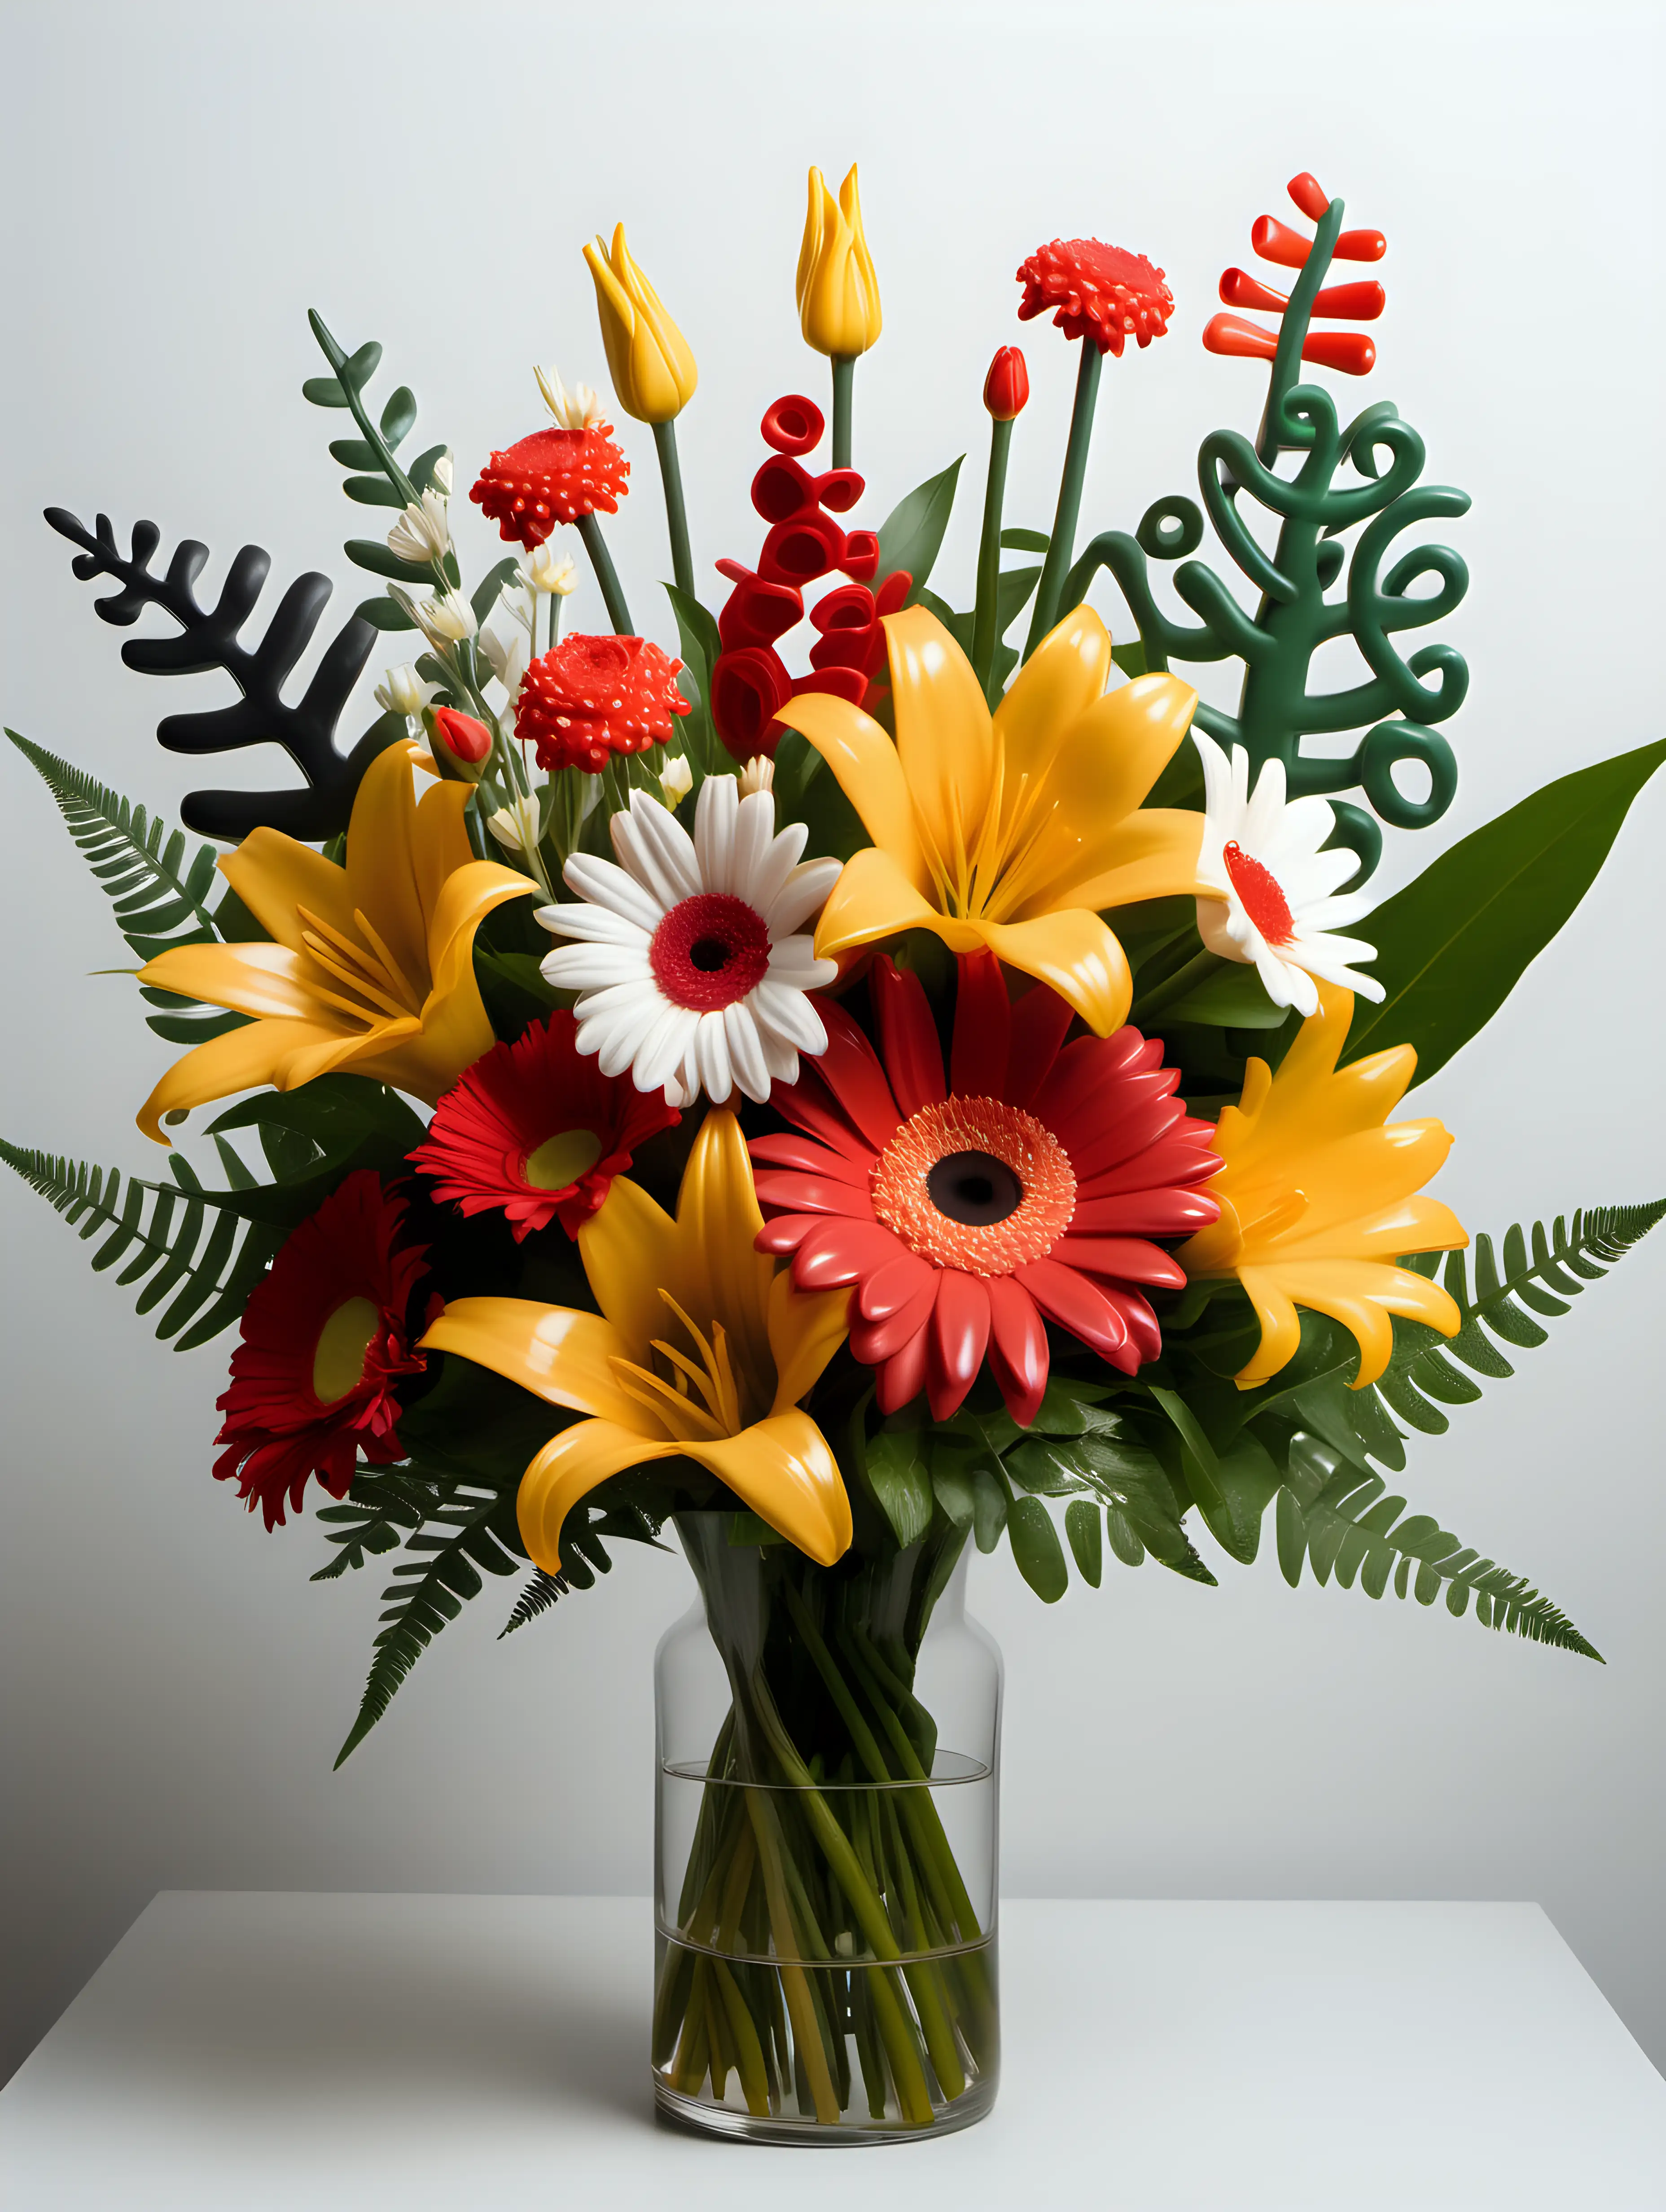 Vibrant Honeysuckle Bouquet with Artistic Flair Keith Haring Inspired Floral Arrangement